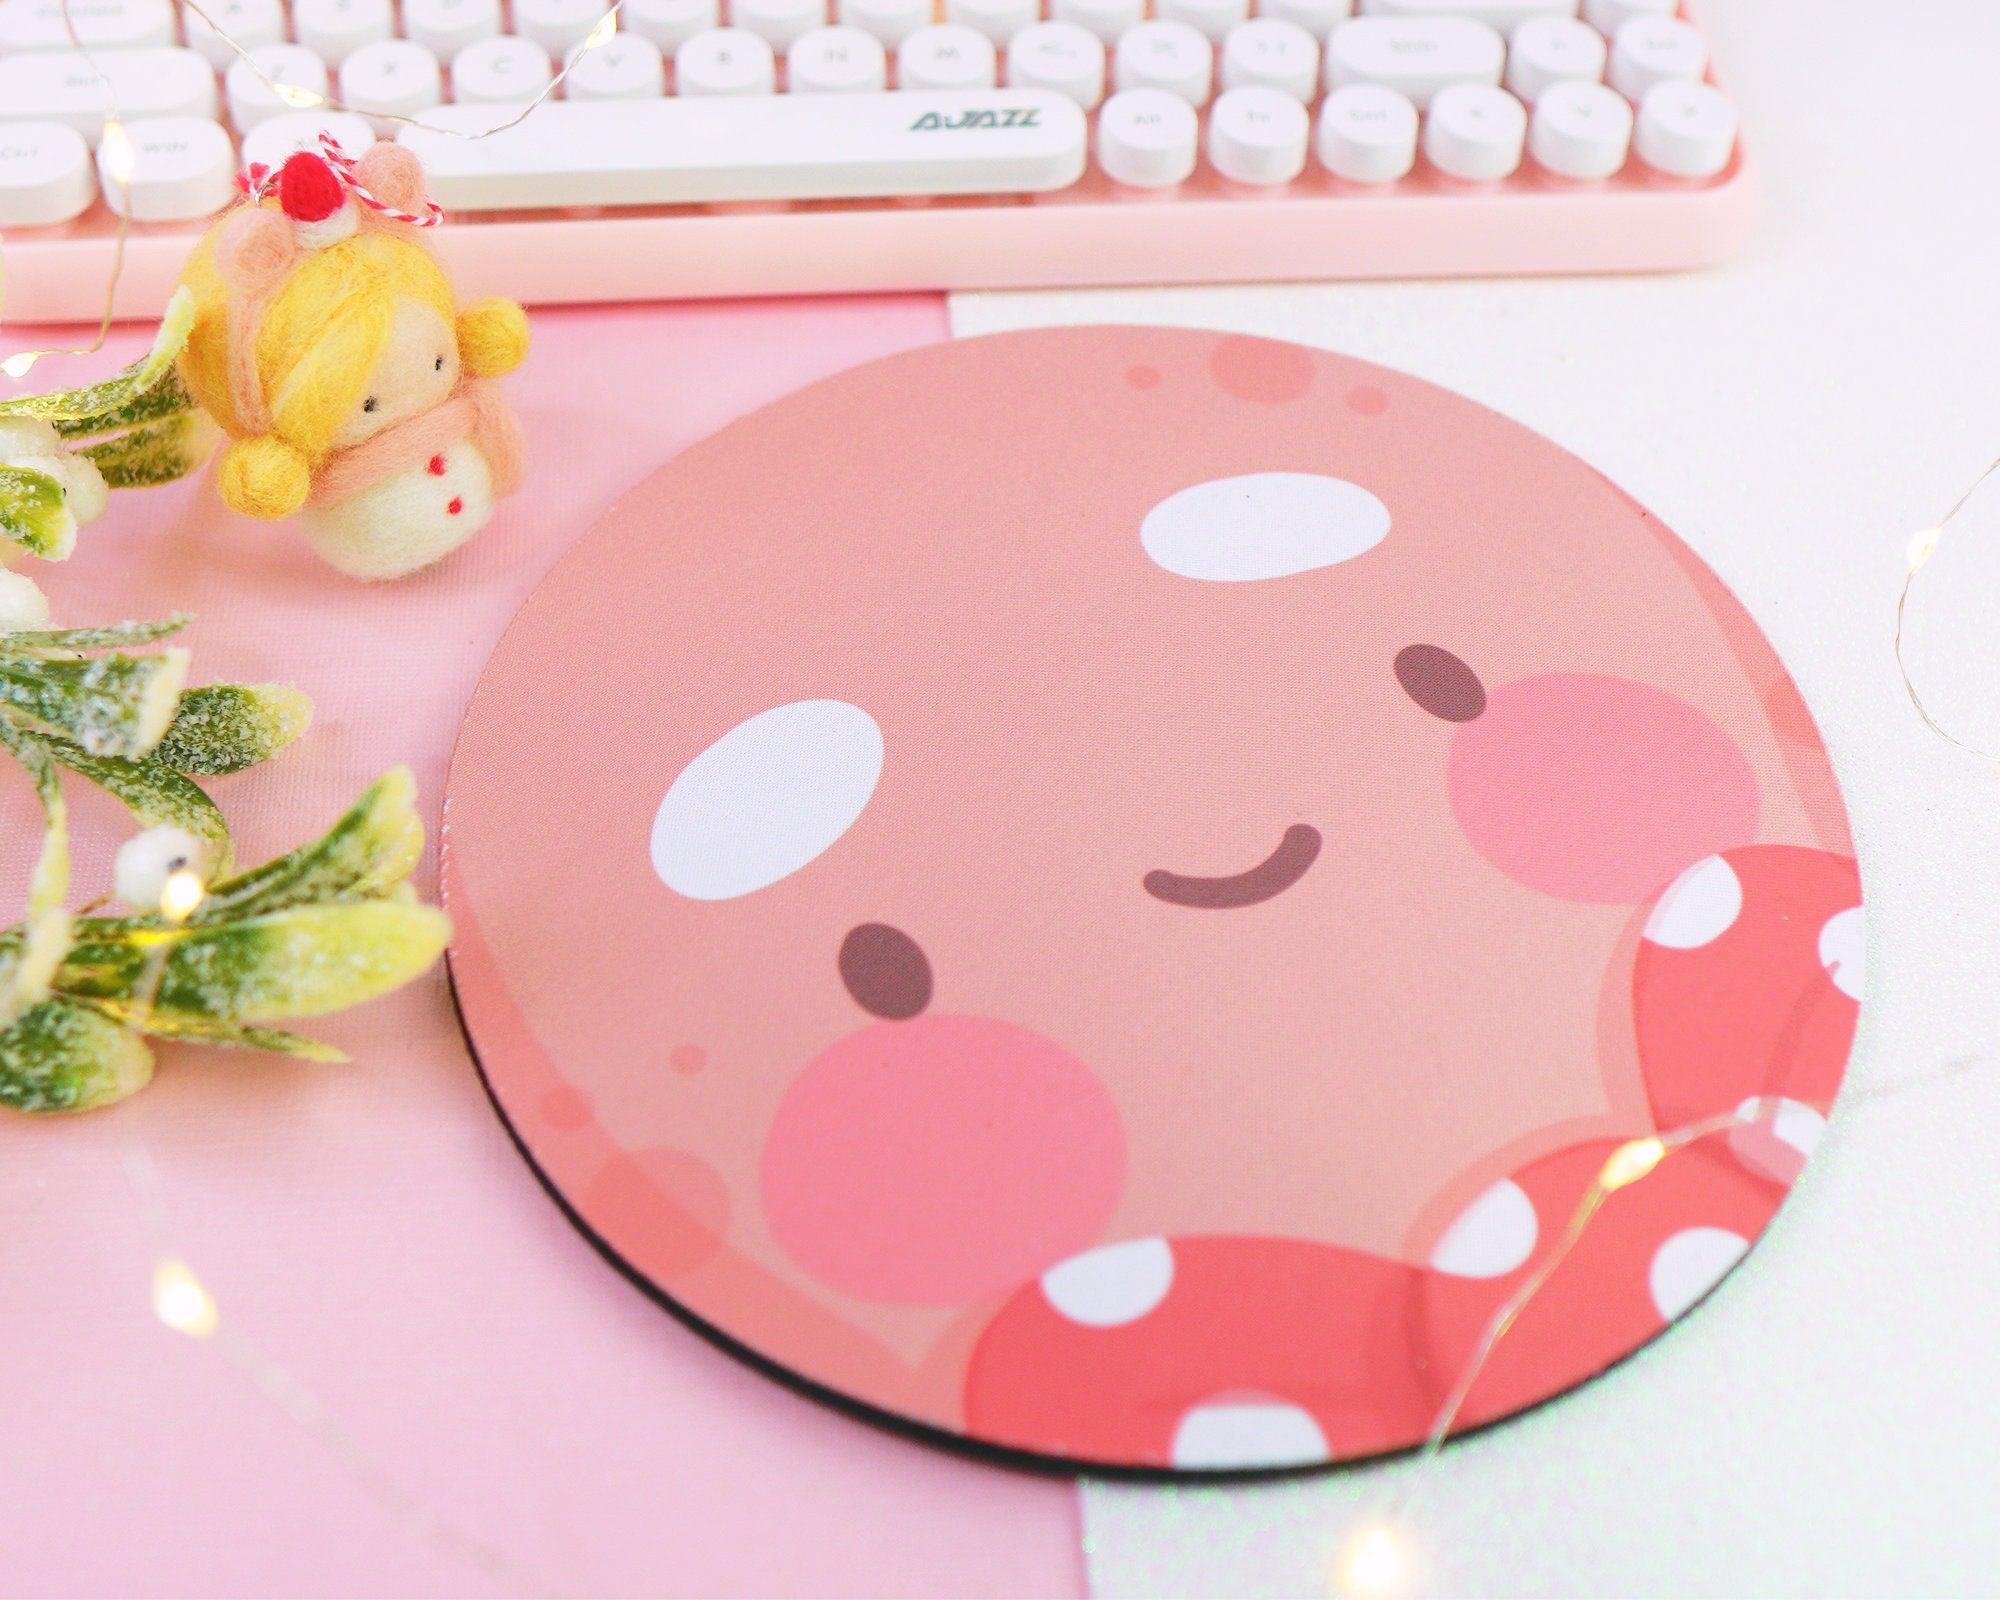 Gingie Mouse pad ~ Cute Gingerbread Mouse Mat - Katnipp Illustrations